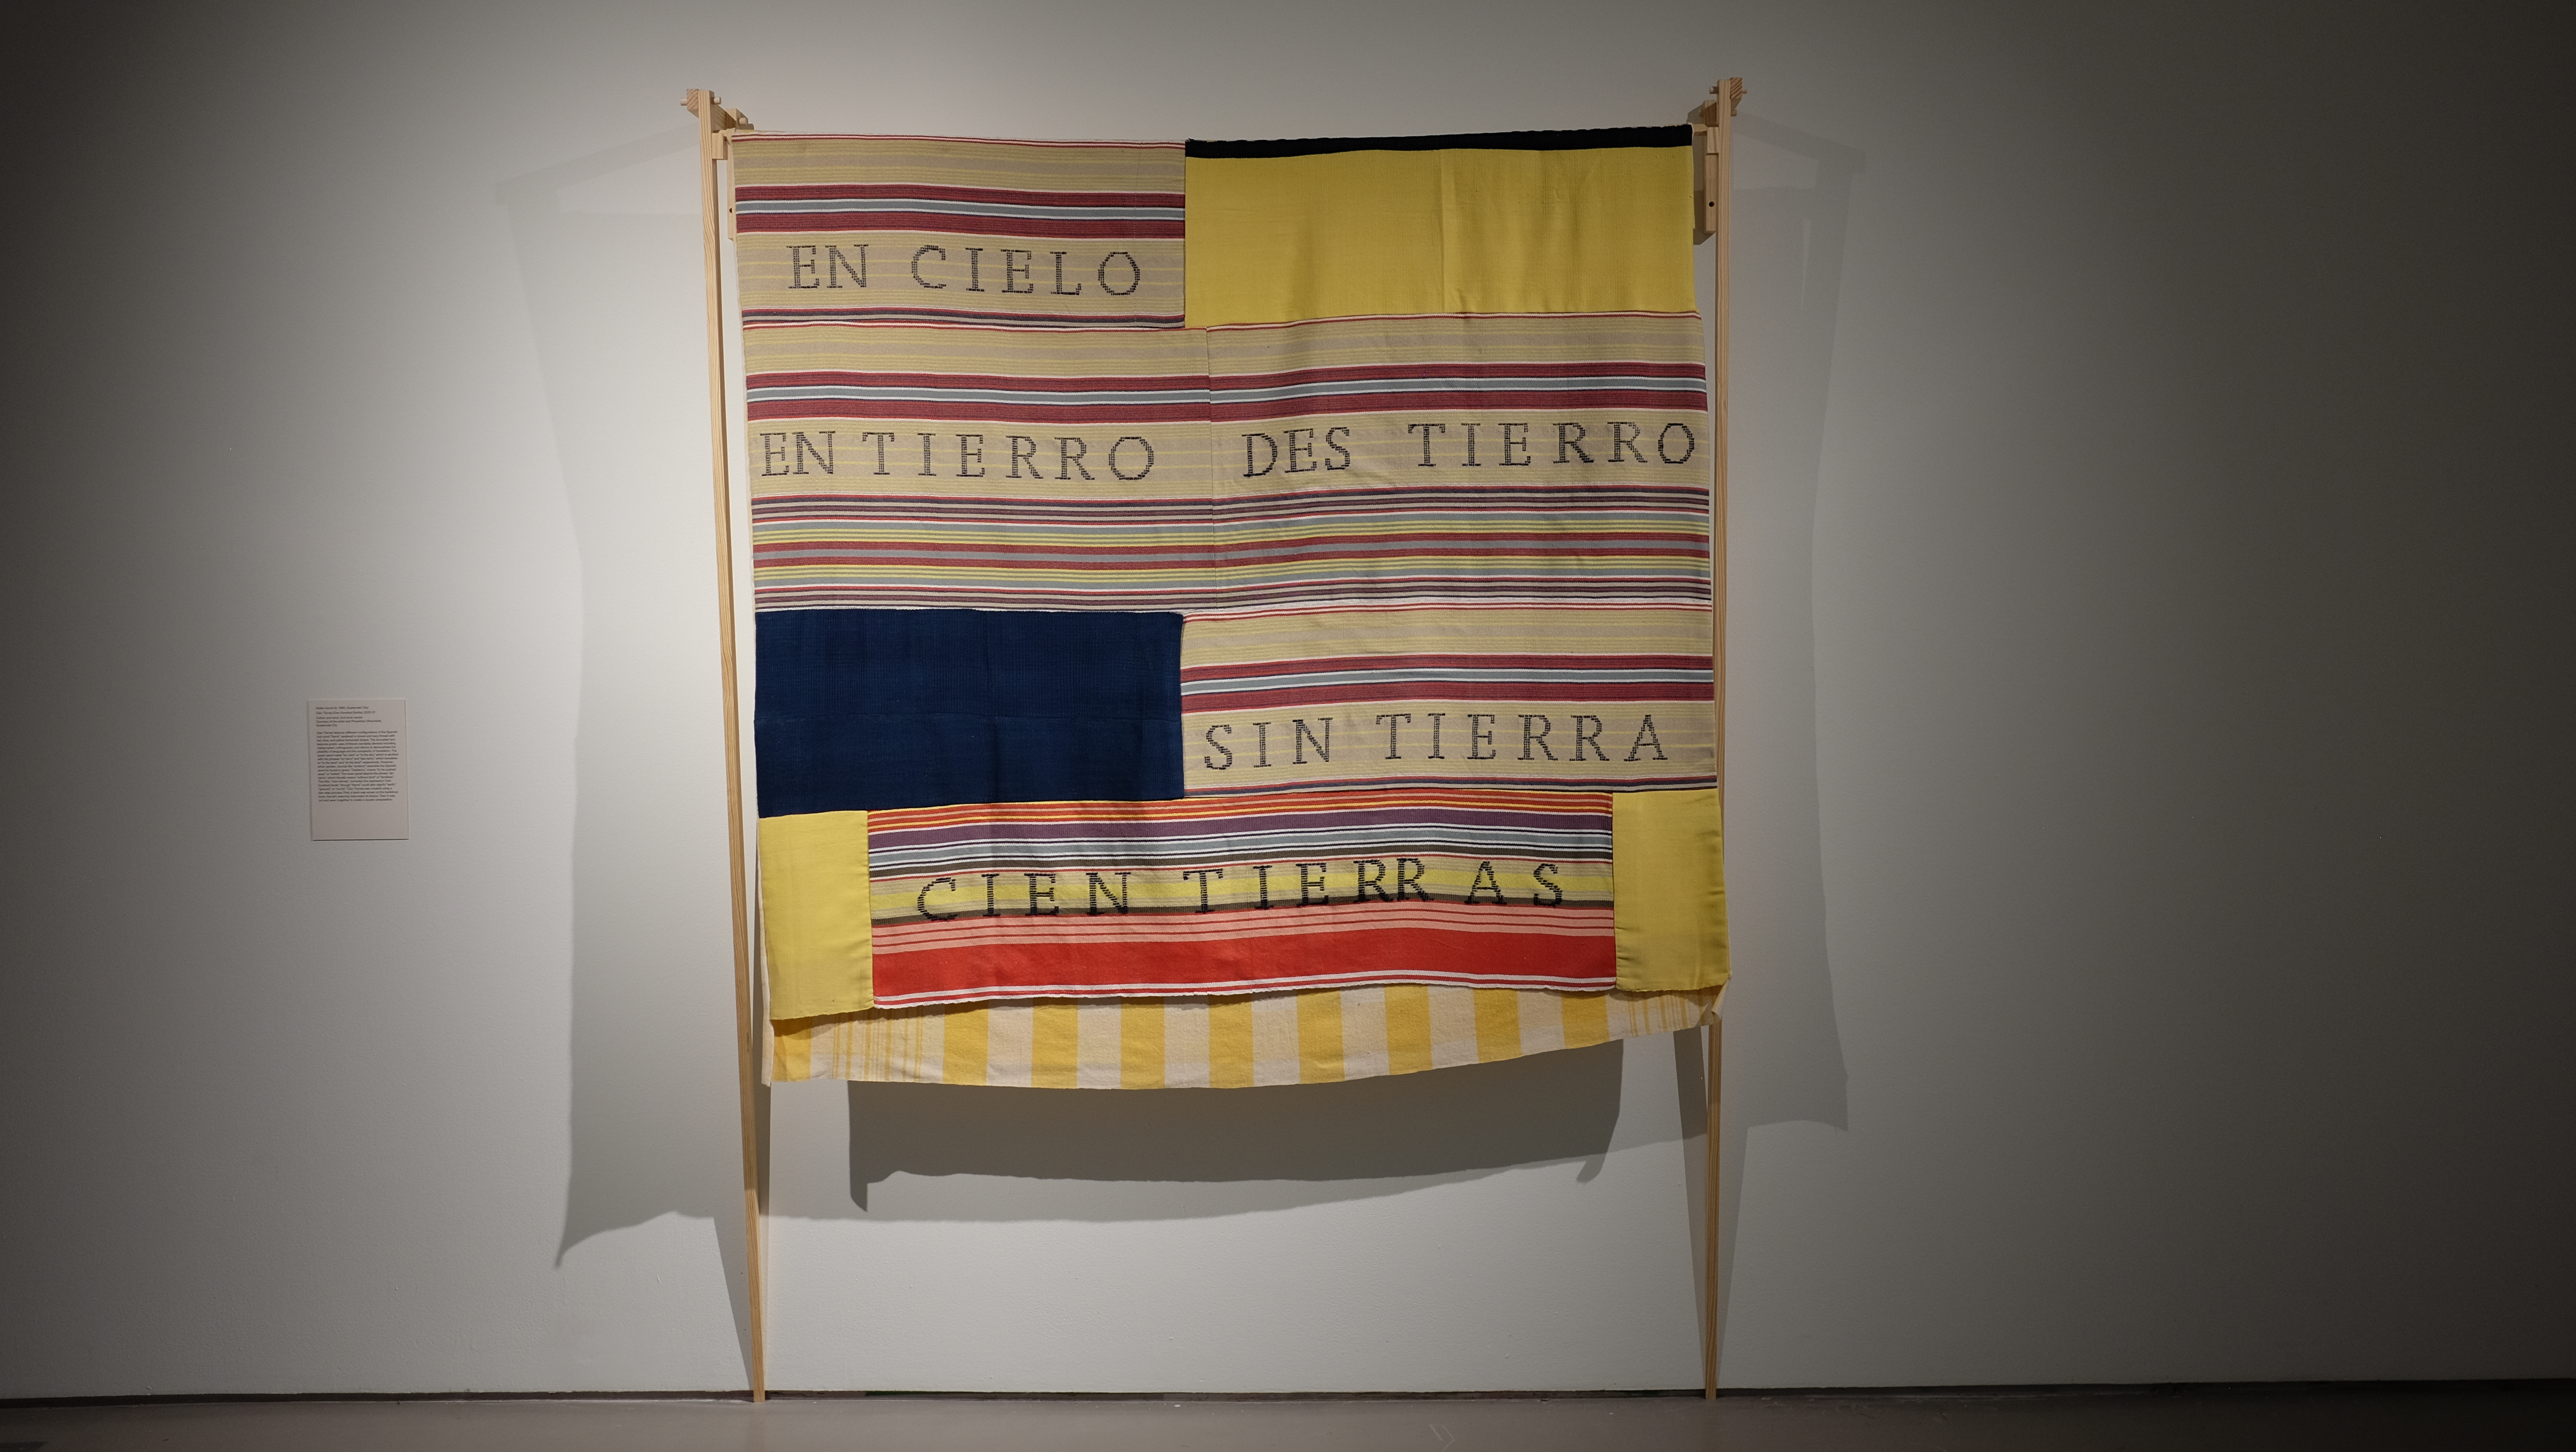 Cien Tierras features different configurations of the Spanish root word ‘tierra’ rendered in brown and navy thread with red, blue, and yellow horizontal stripes. The brocaded text features poetic uses of literary wordplay devices including malapropism, orthography and idioms to demonstrate the pliability of language and the complexity of translation. The upper panel reads ‘en cielo’ or ‘in the sky’, which is abutted with the phrases ‘en tierro’ and ‘des tierro’ which translates to ‘in the land’ and ‘of the land’ respectively. However, when spoken sounds like ‘entierro’ resembles the Spanish word for burial or grave. ‘Destierro’ means to be pushed away or exiled. The lower panel depicts the phrase ‘sin tierra’ which literally means without land or landless. The title, ‘cien tierras’, connotes the xpression ‘one hundred lands,’ though tierra could also signify earth, ground or world.